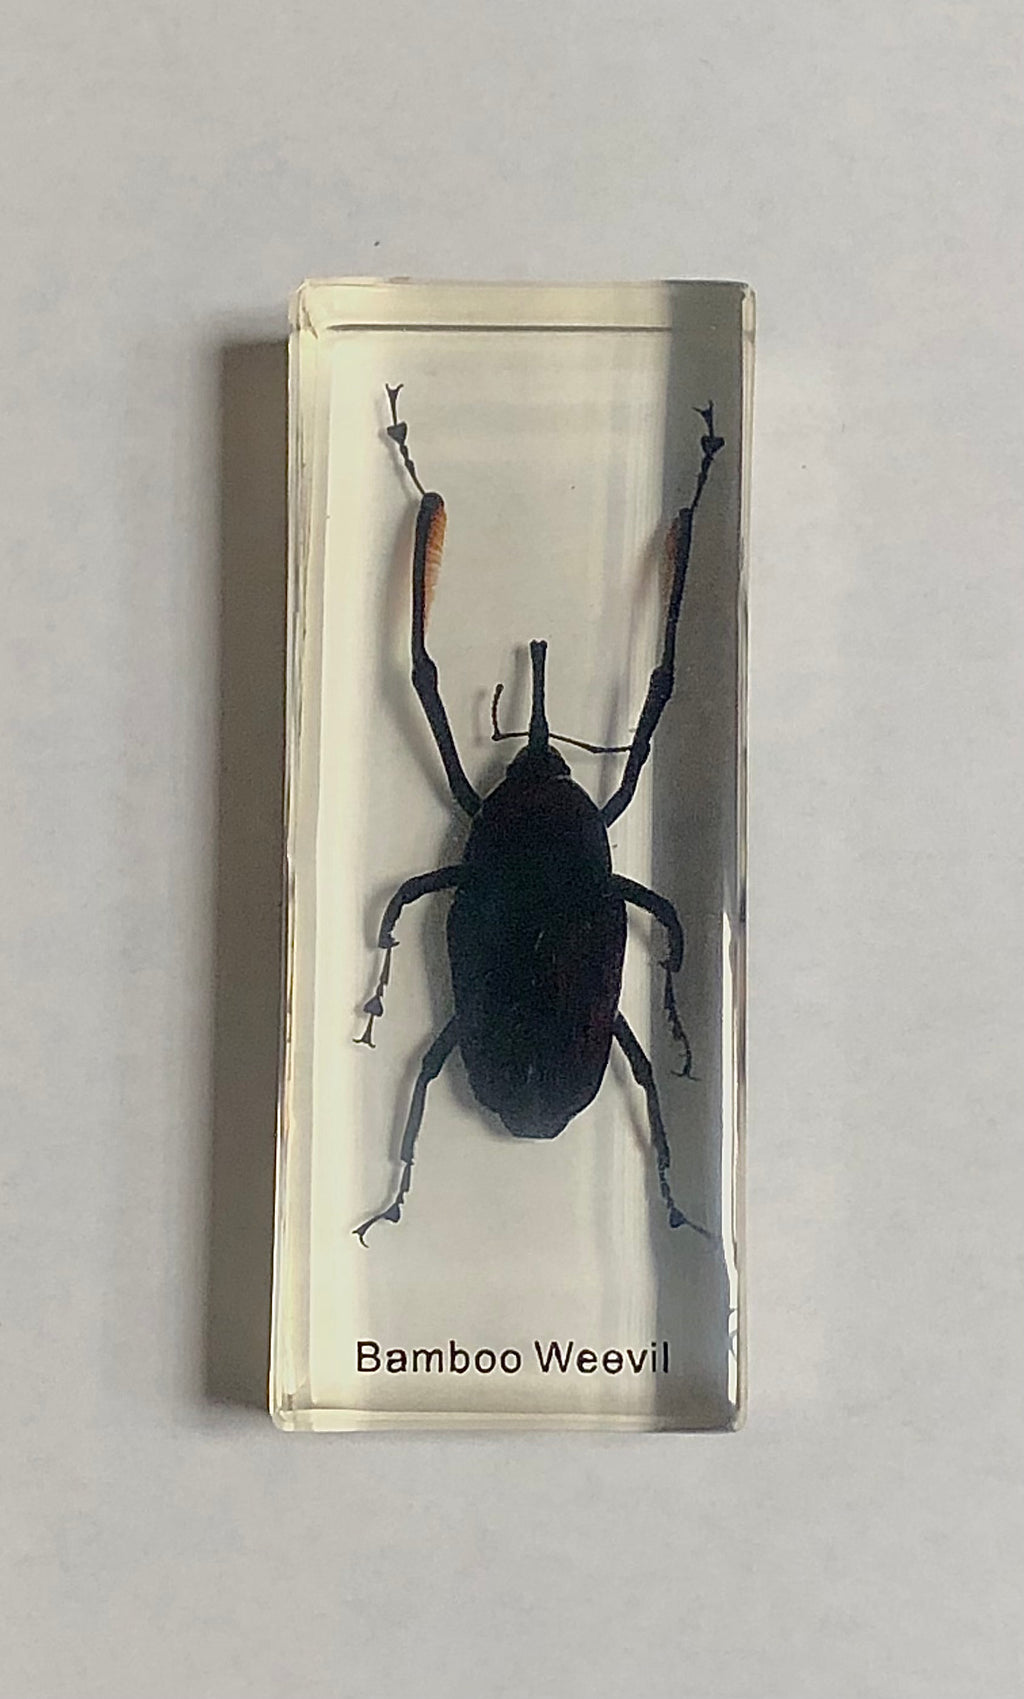 Bamboo Weevil in Lucite